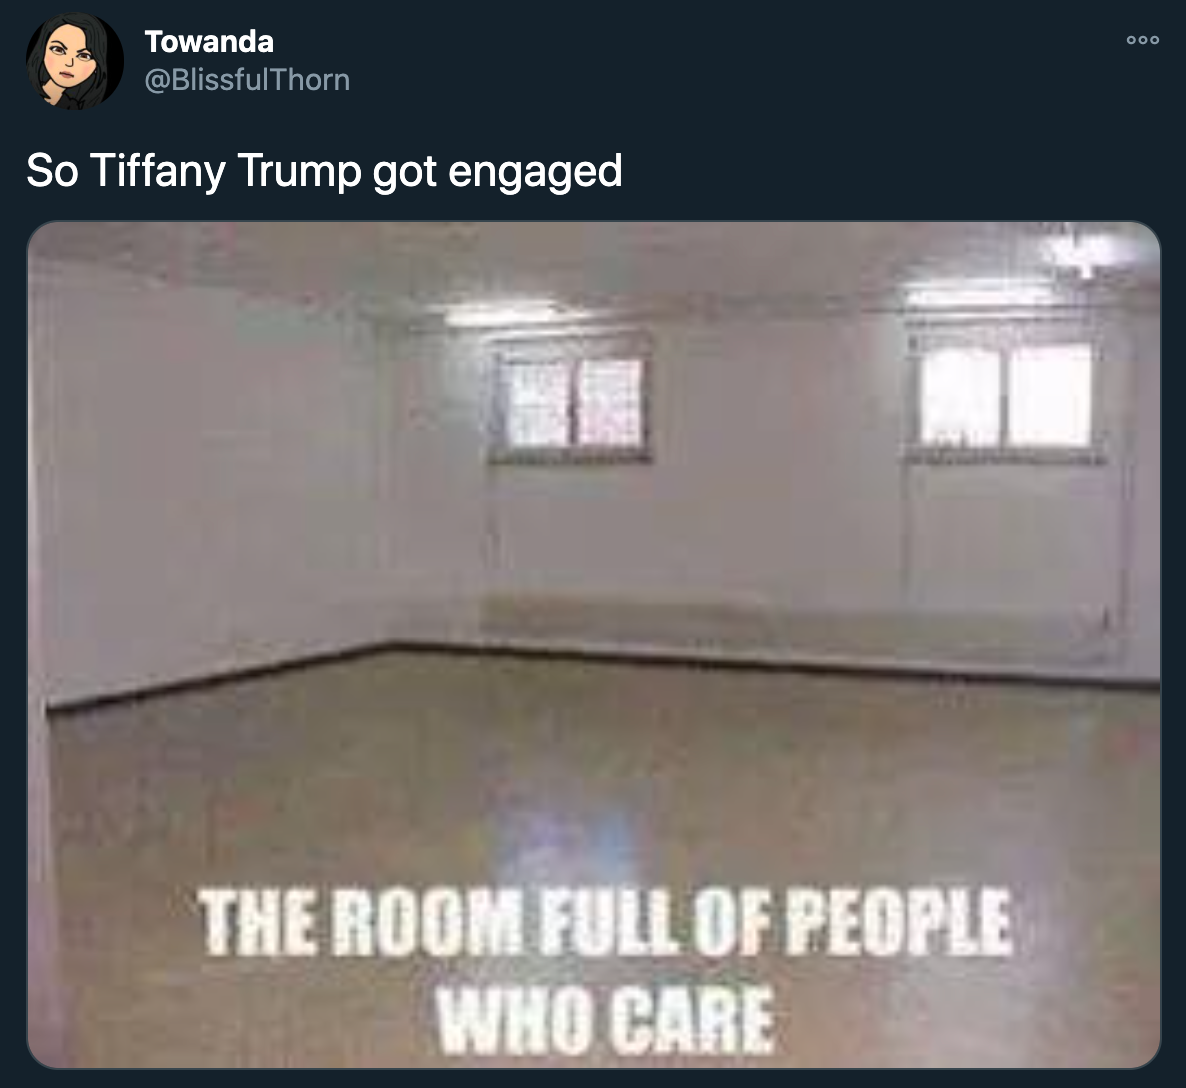 tiffany trump engagement - So Tiffany Trump got engaged The Room Full Of People Who Care